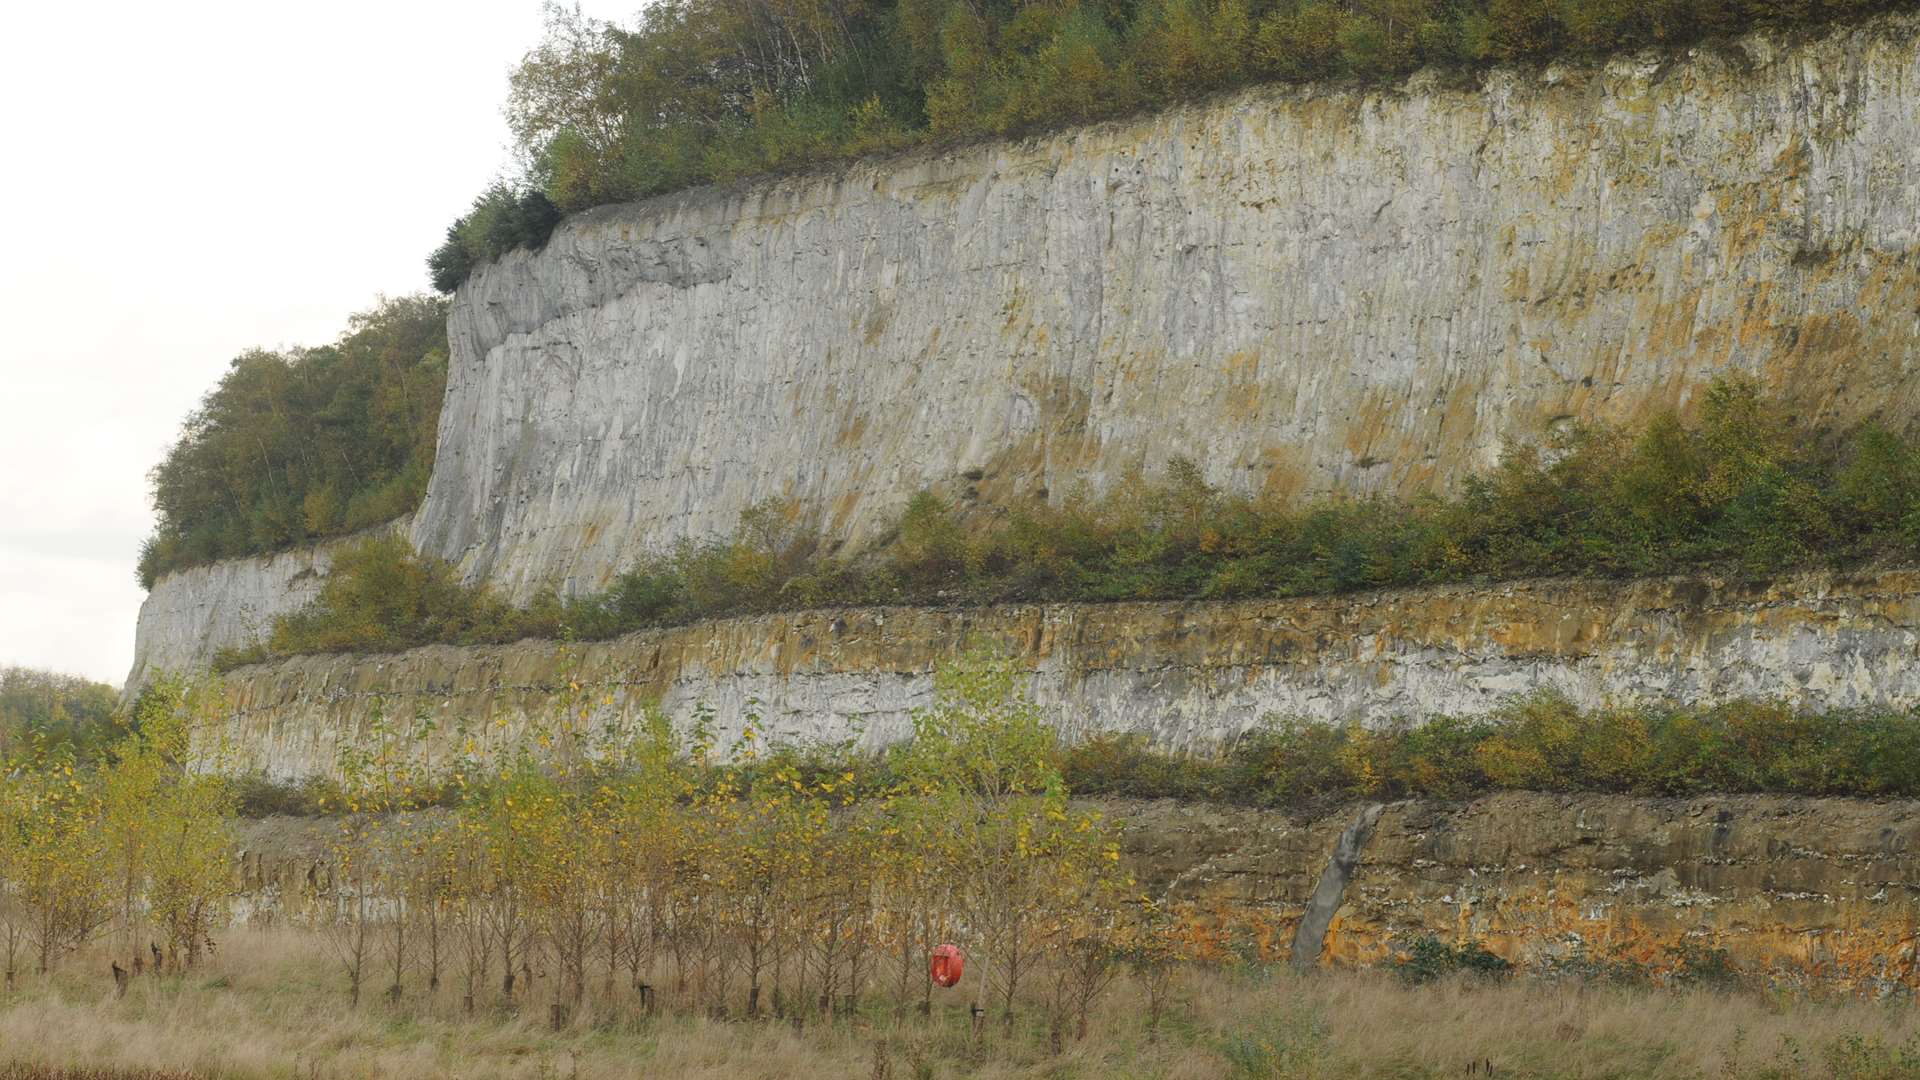 Cliff face in Greenhithe quarry, stock image.